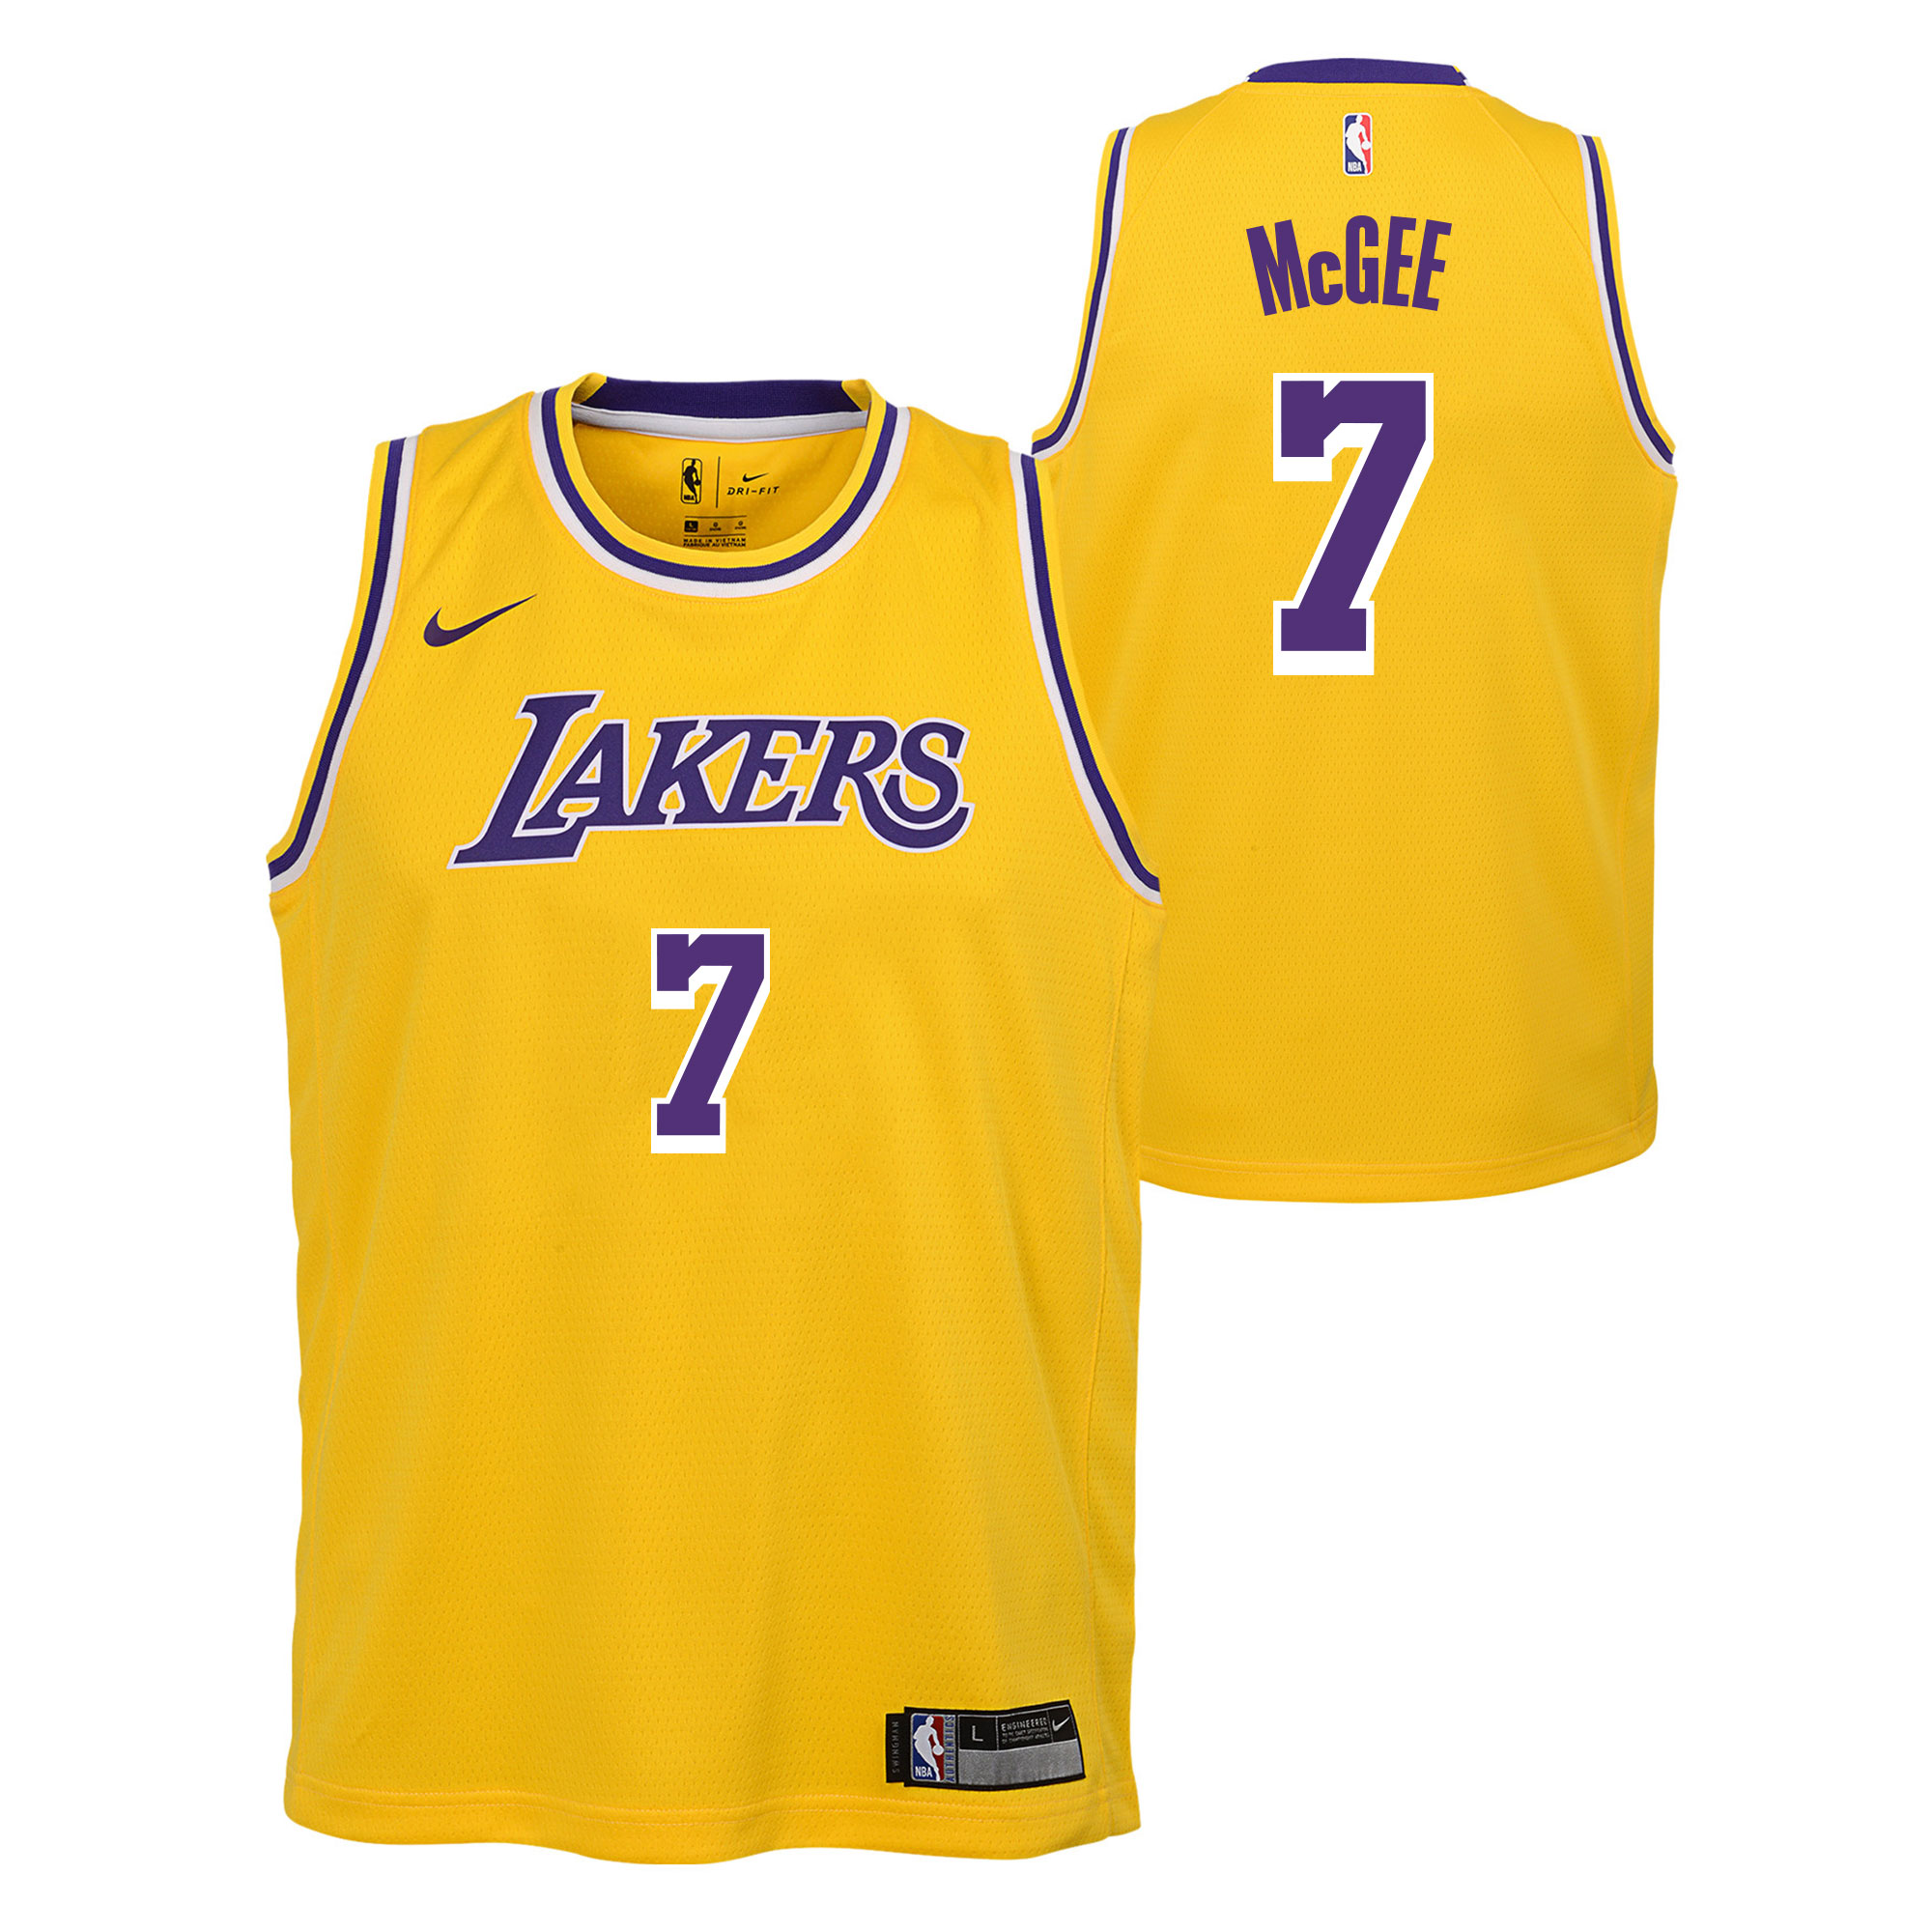 mcgee jersey lakers